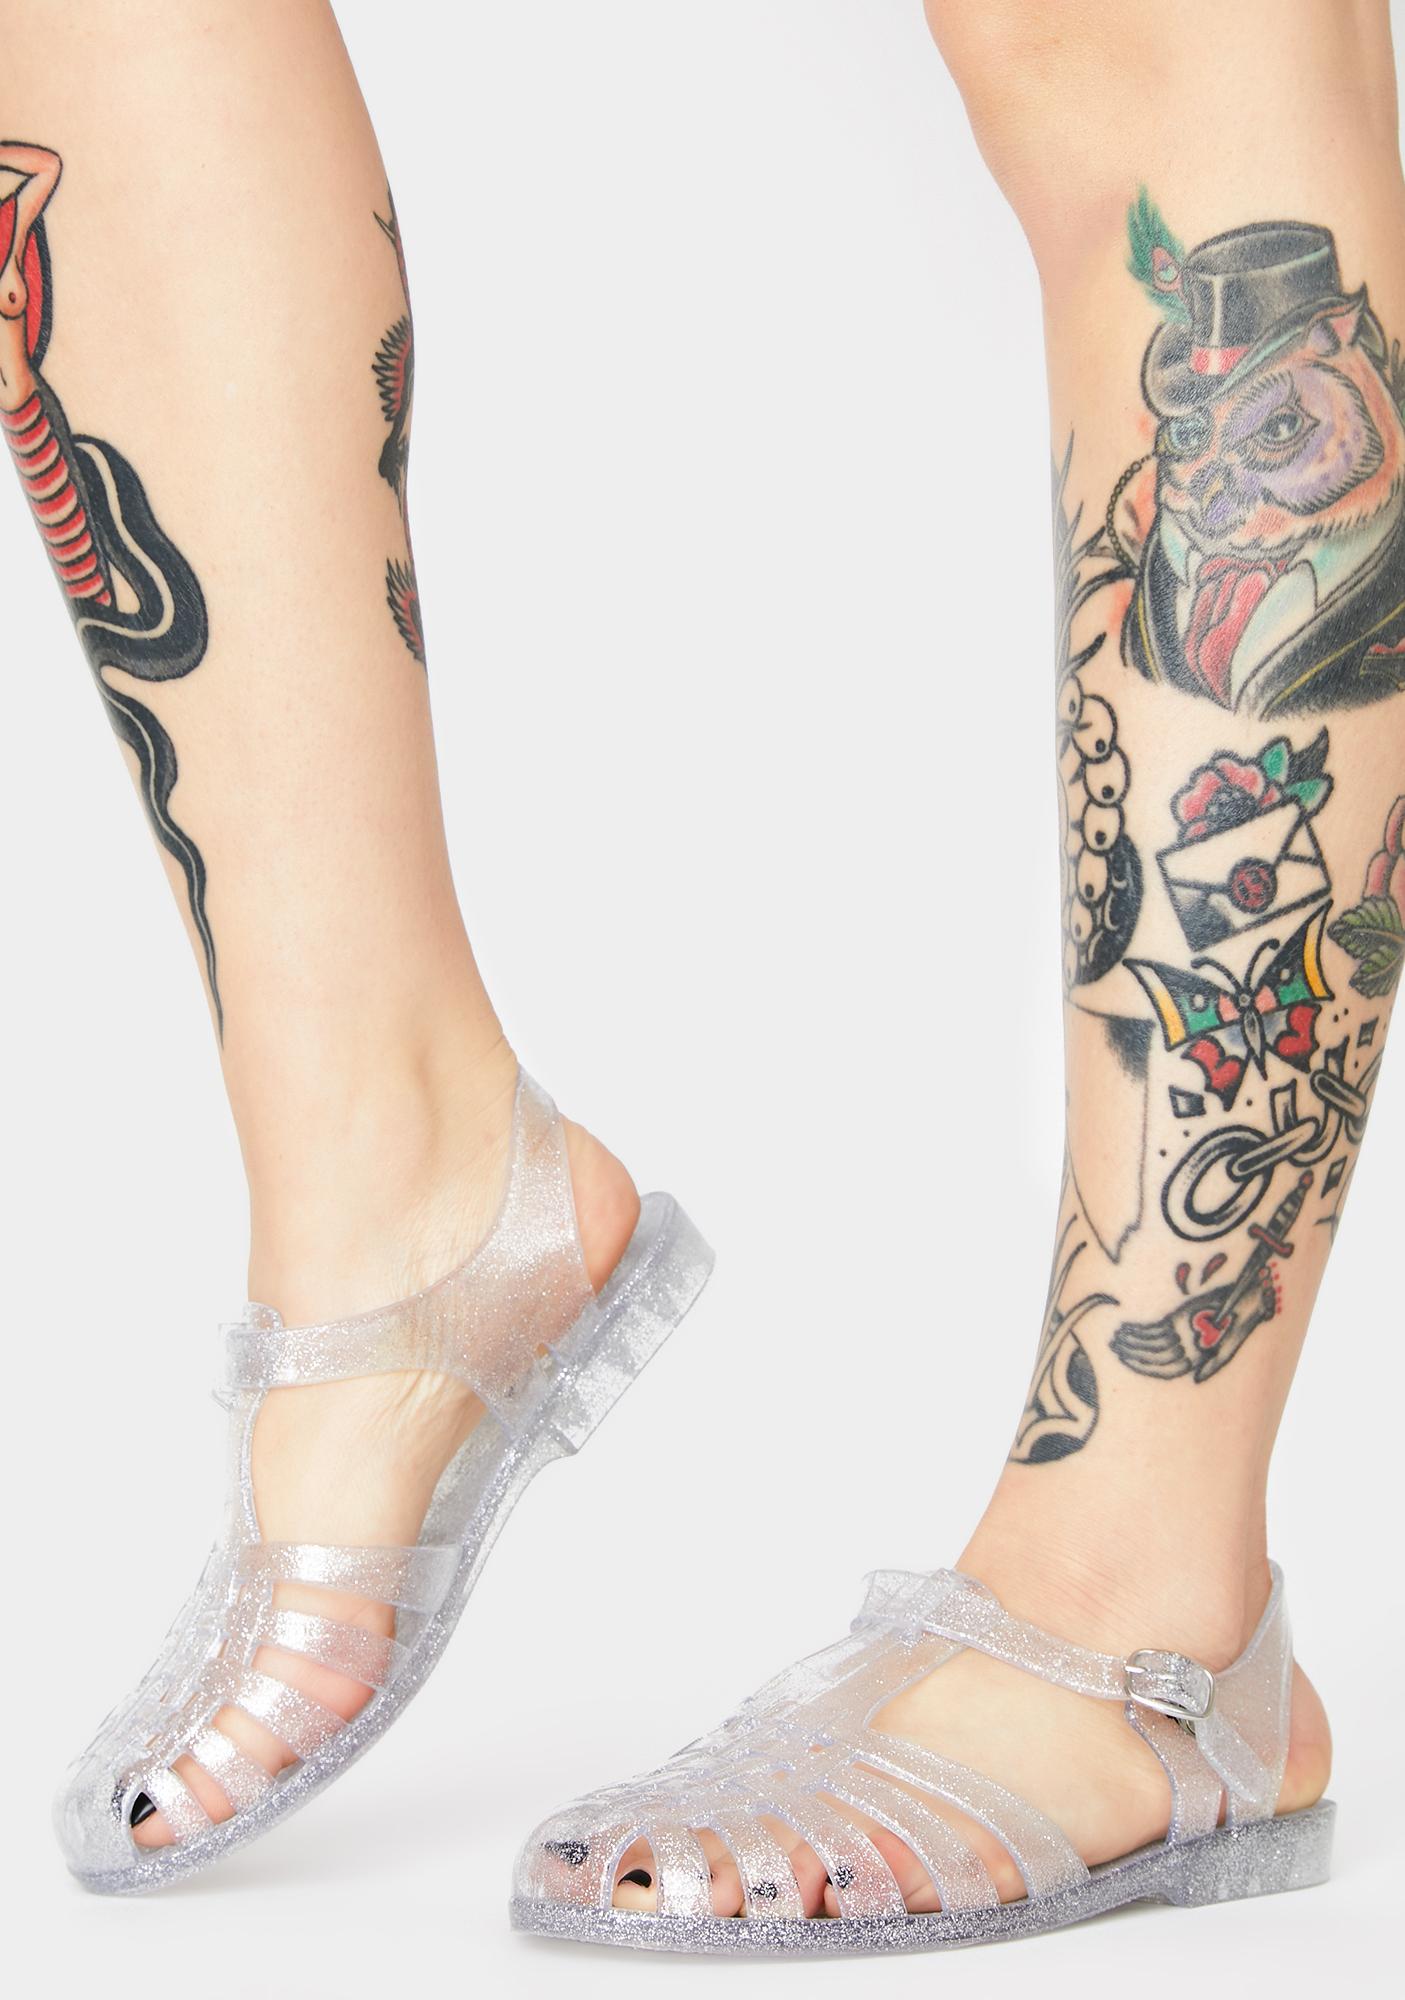 clear glitter jelly shoes